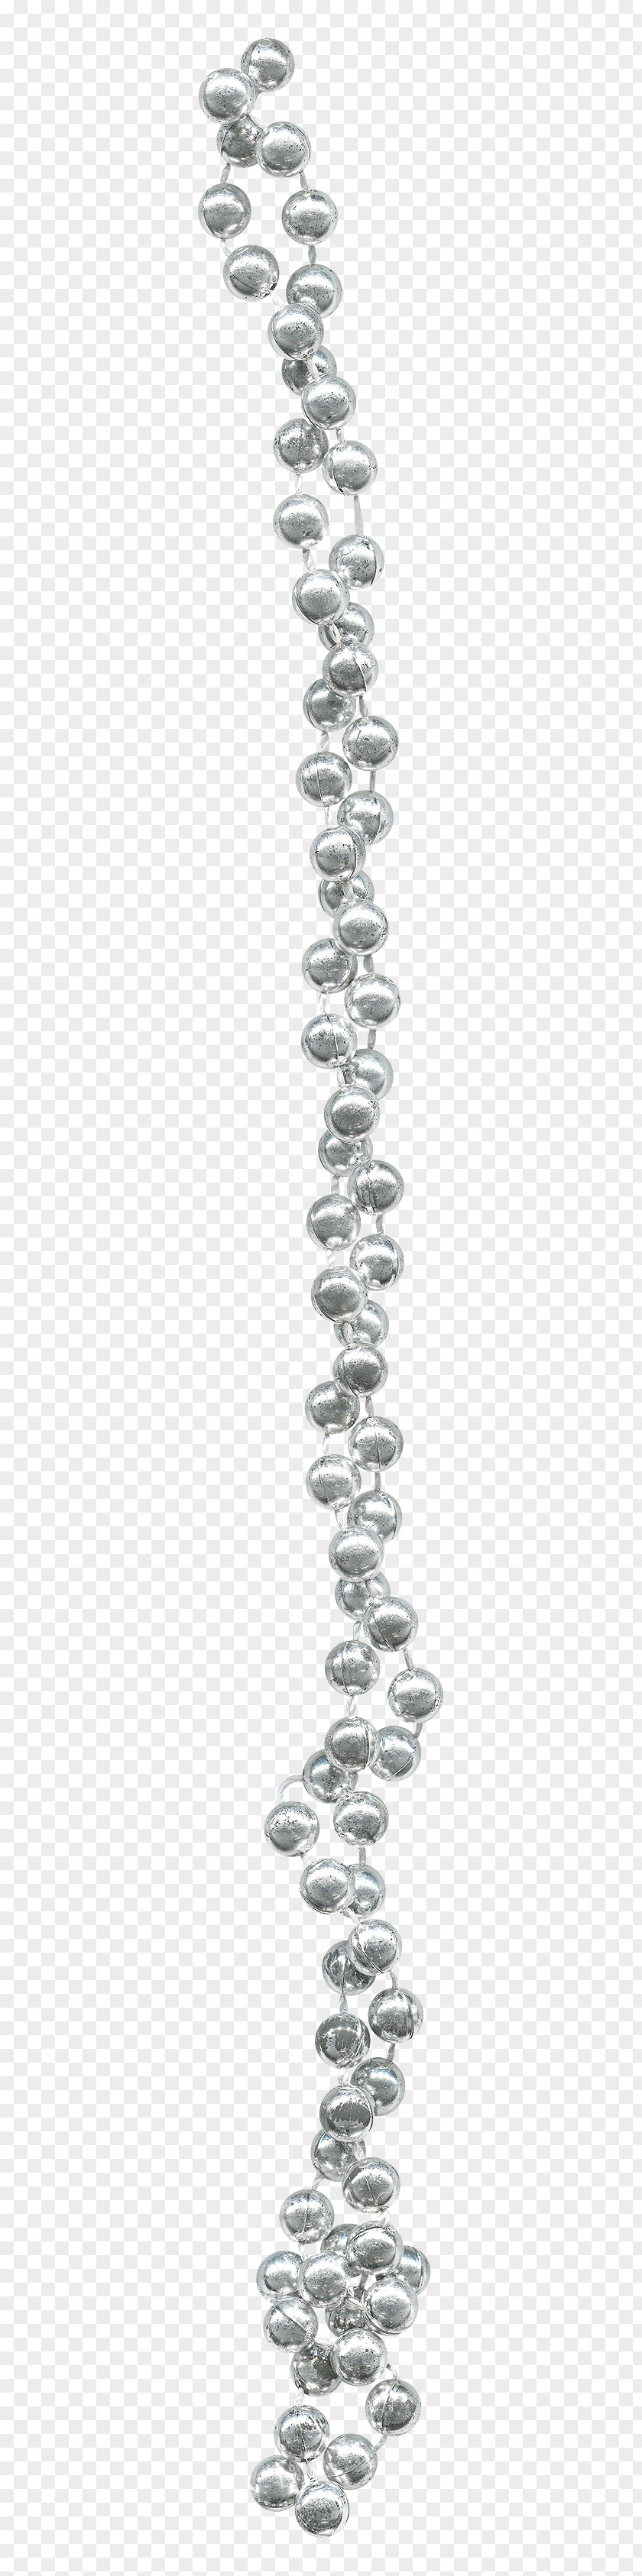 Beautiful Silver Beads Bead Download PNG